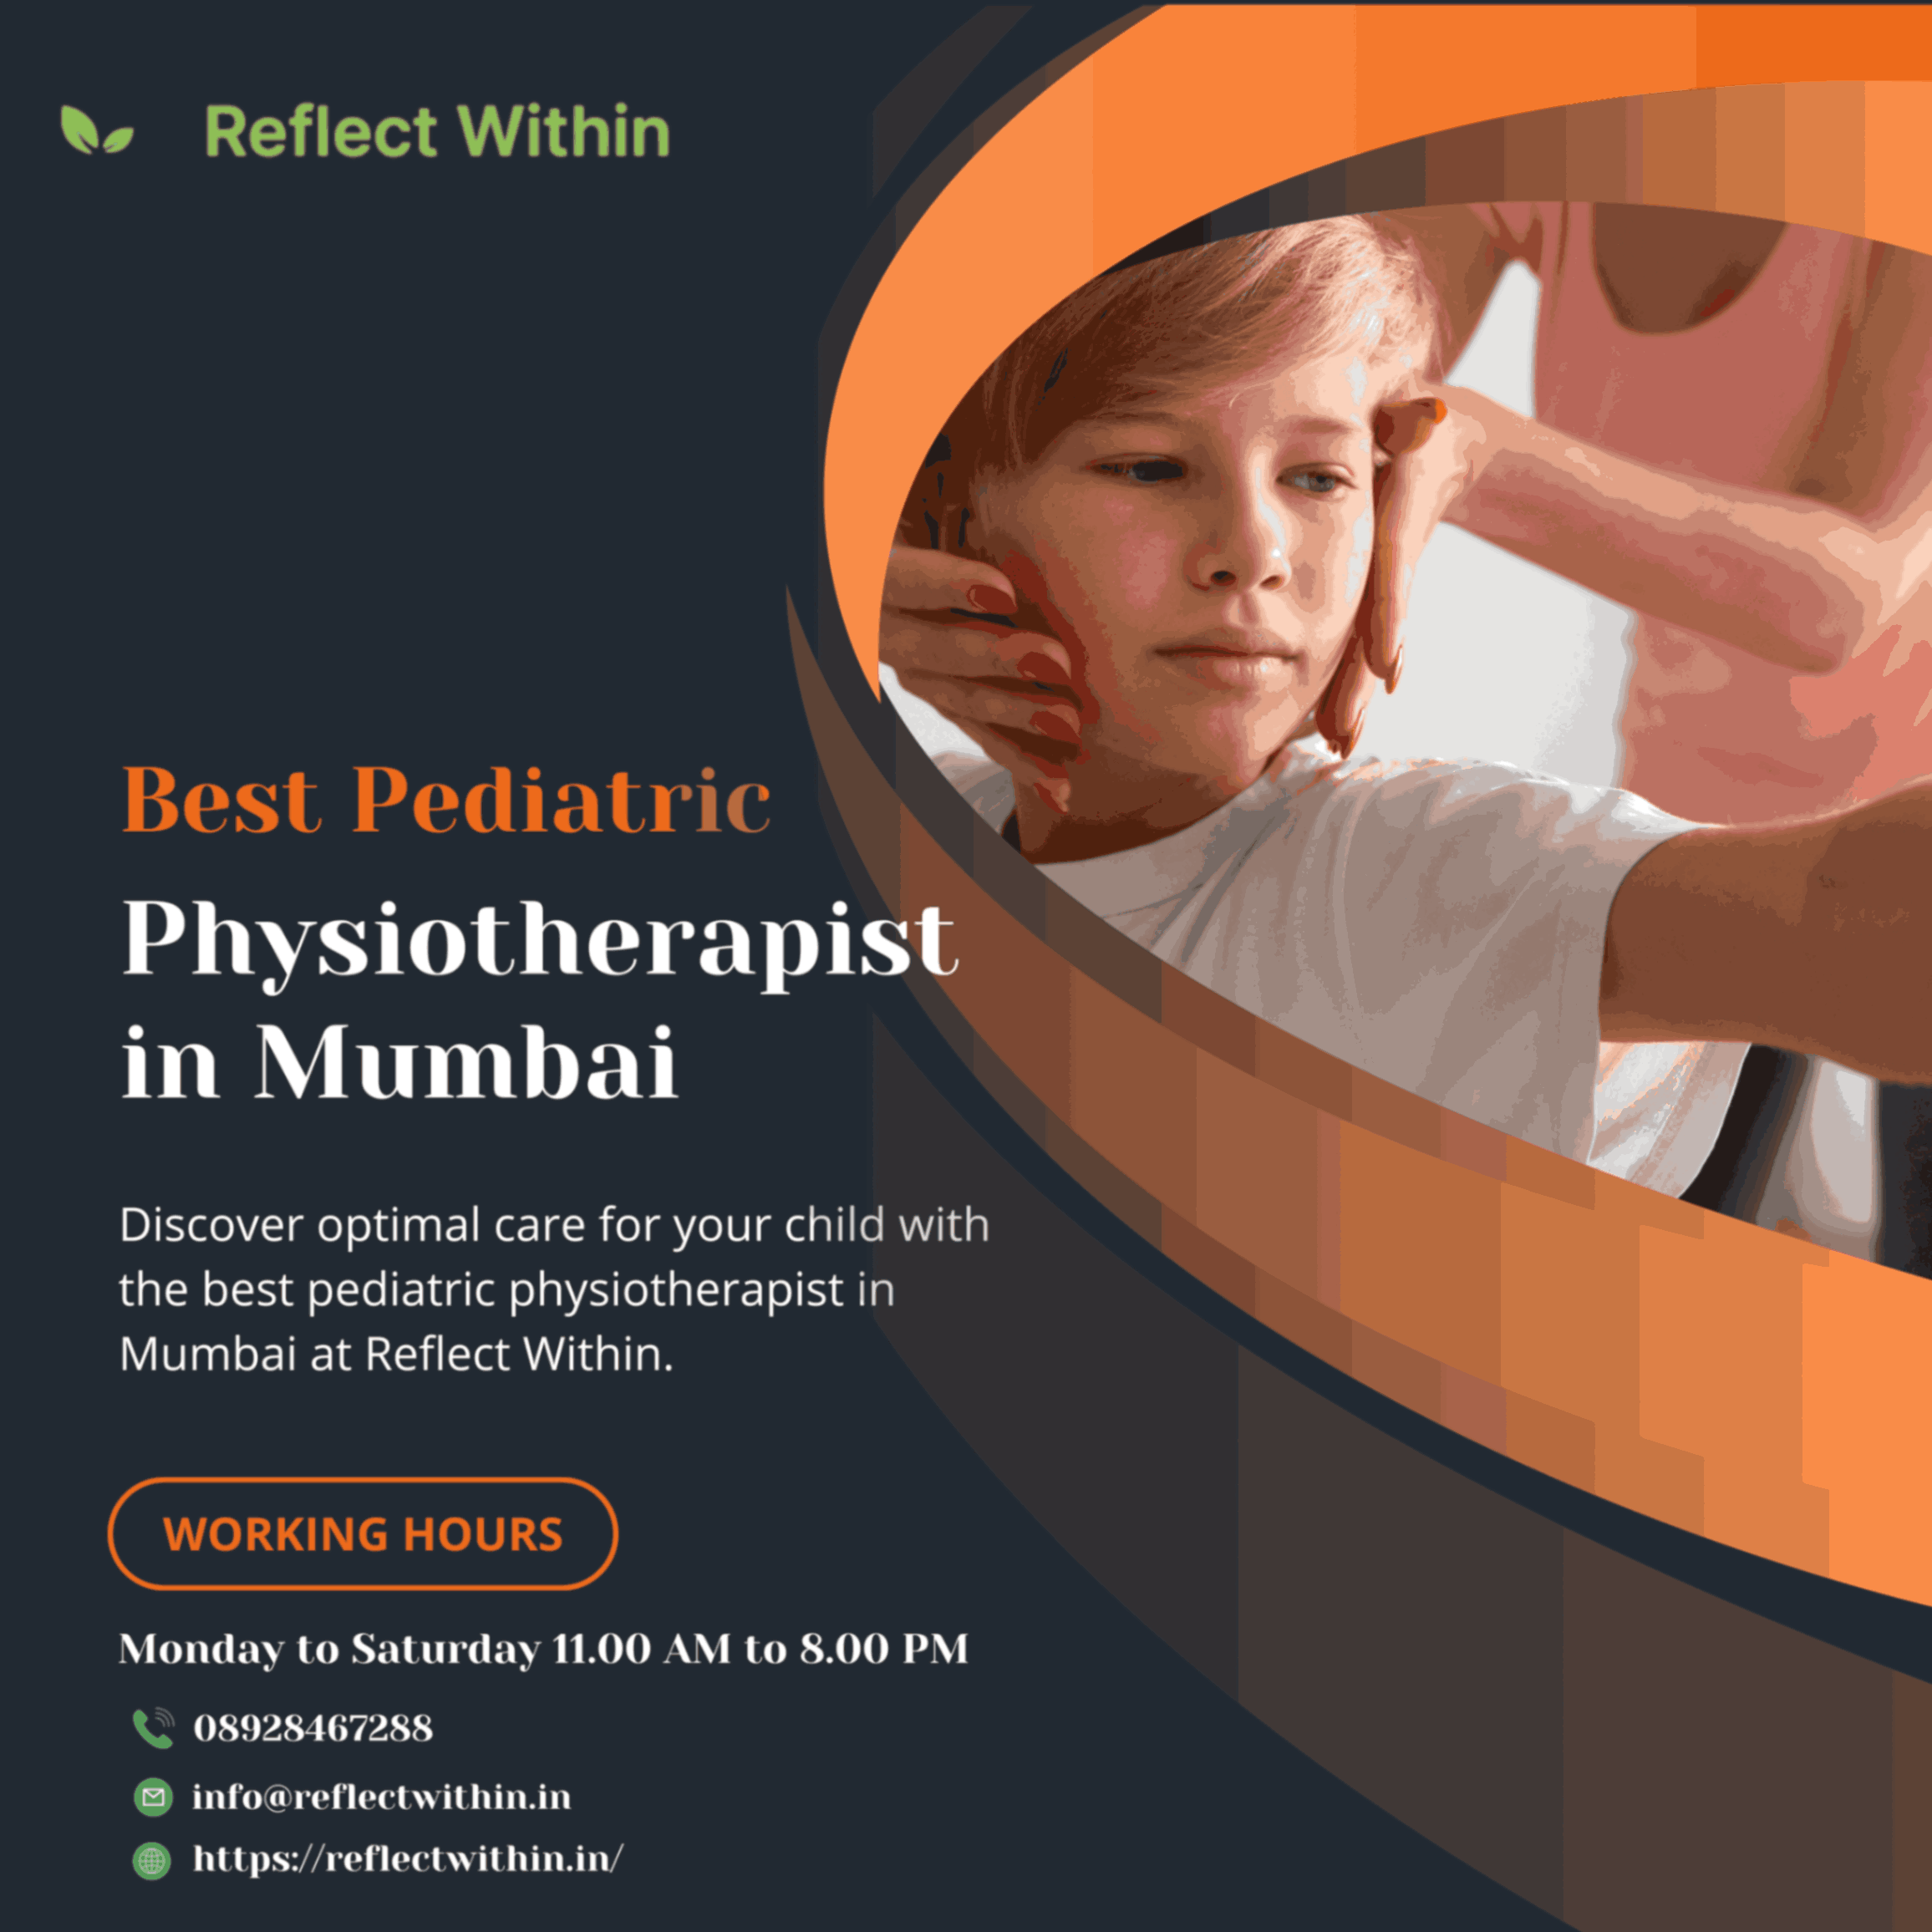 Book an Appointment with the Best Pediatric Physiotherapist in Mumbai